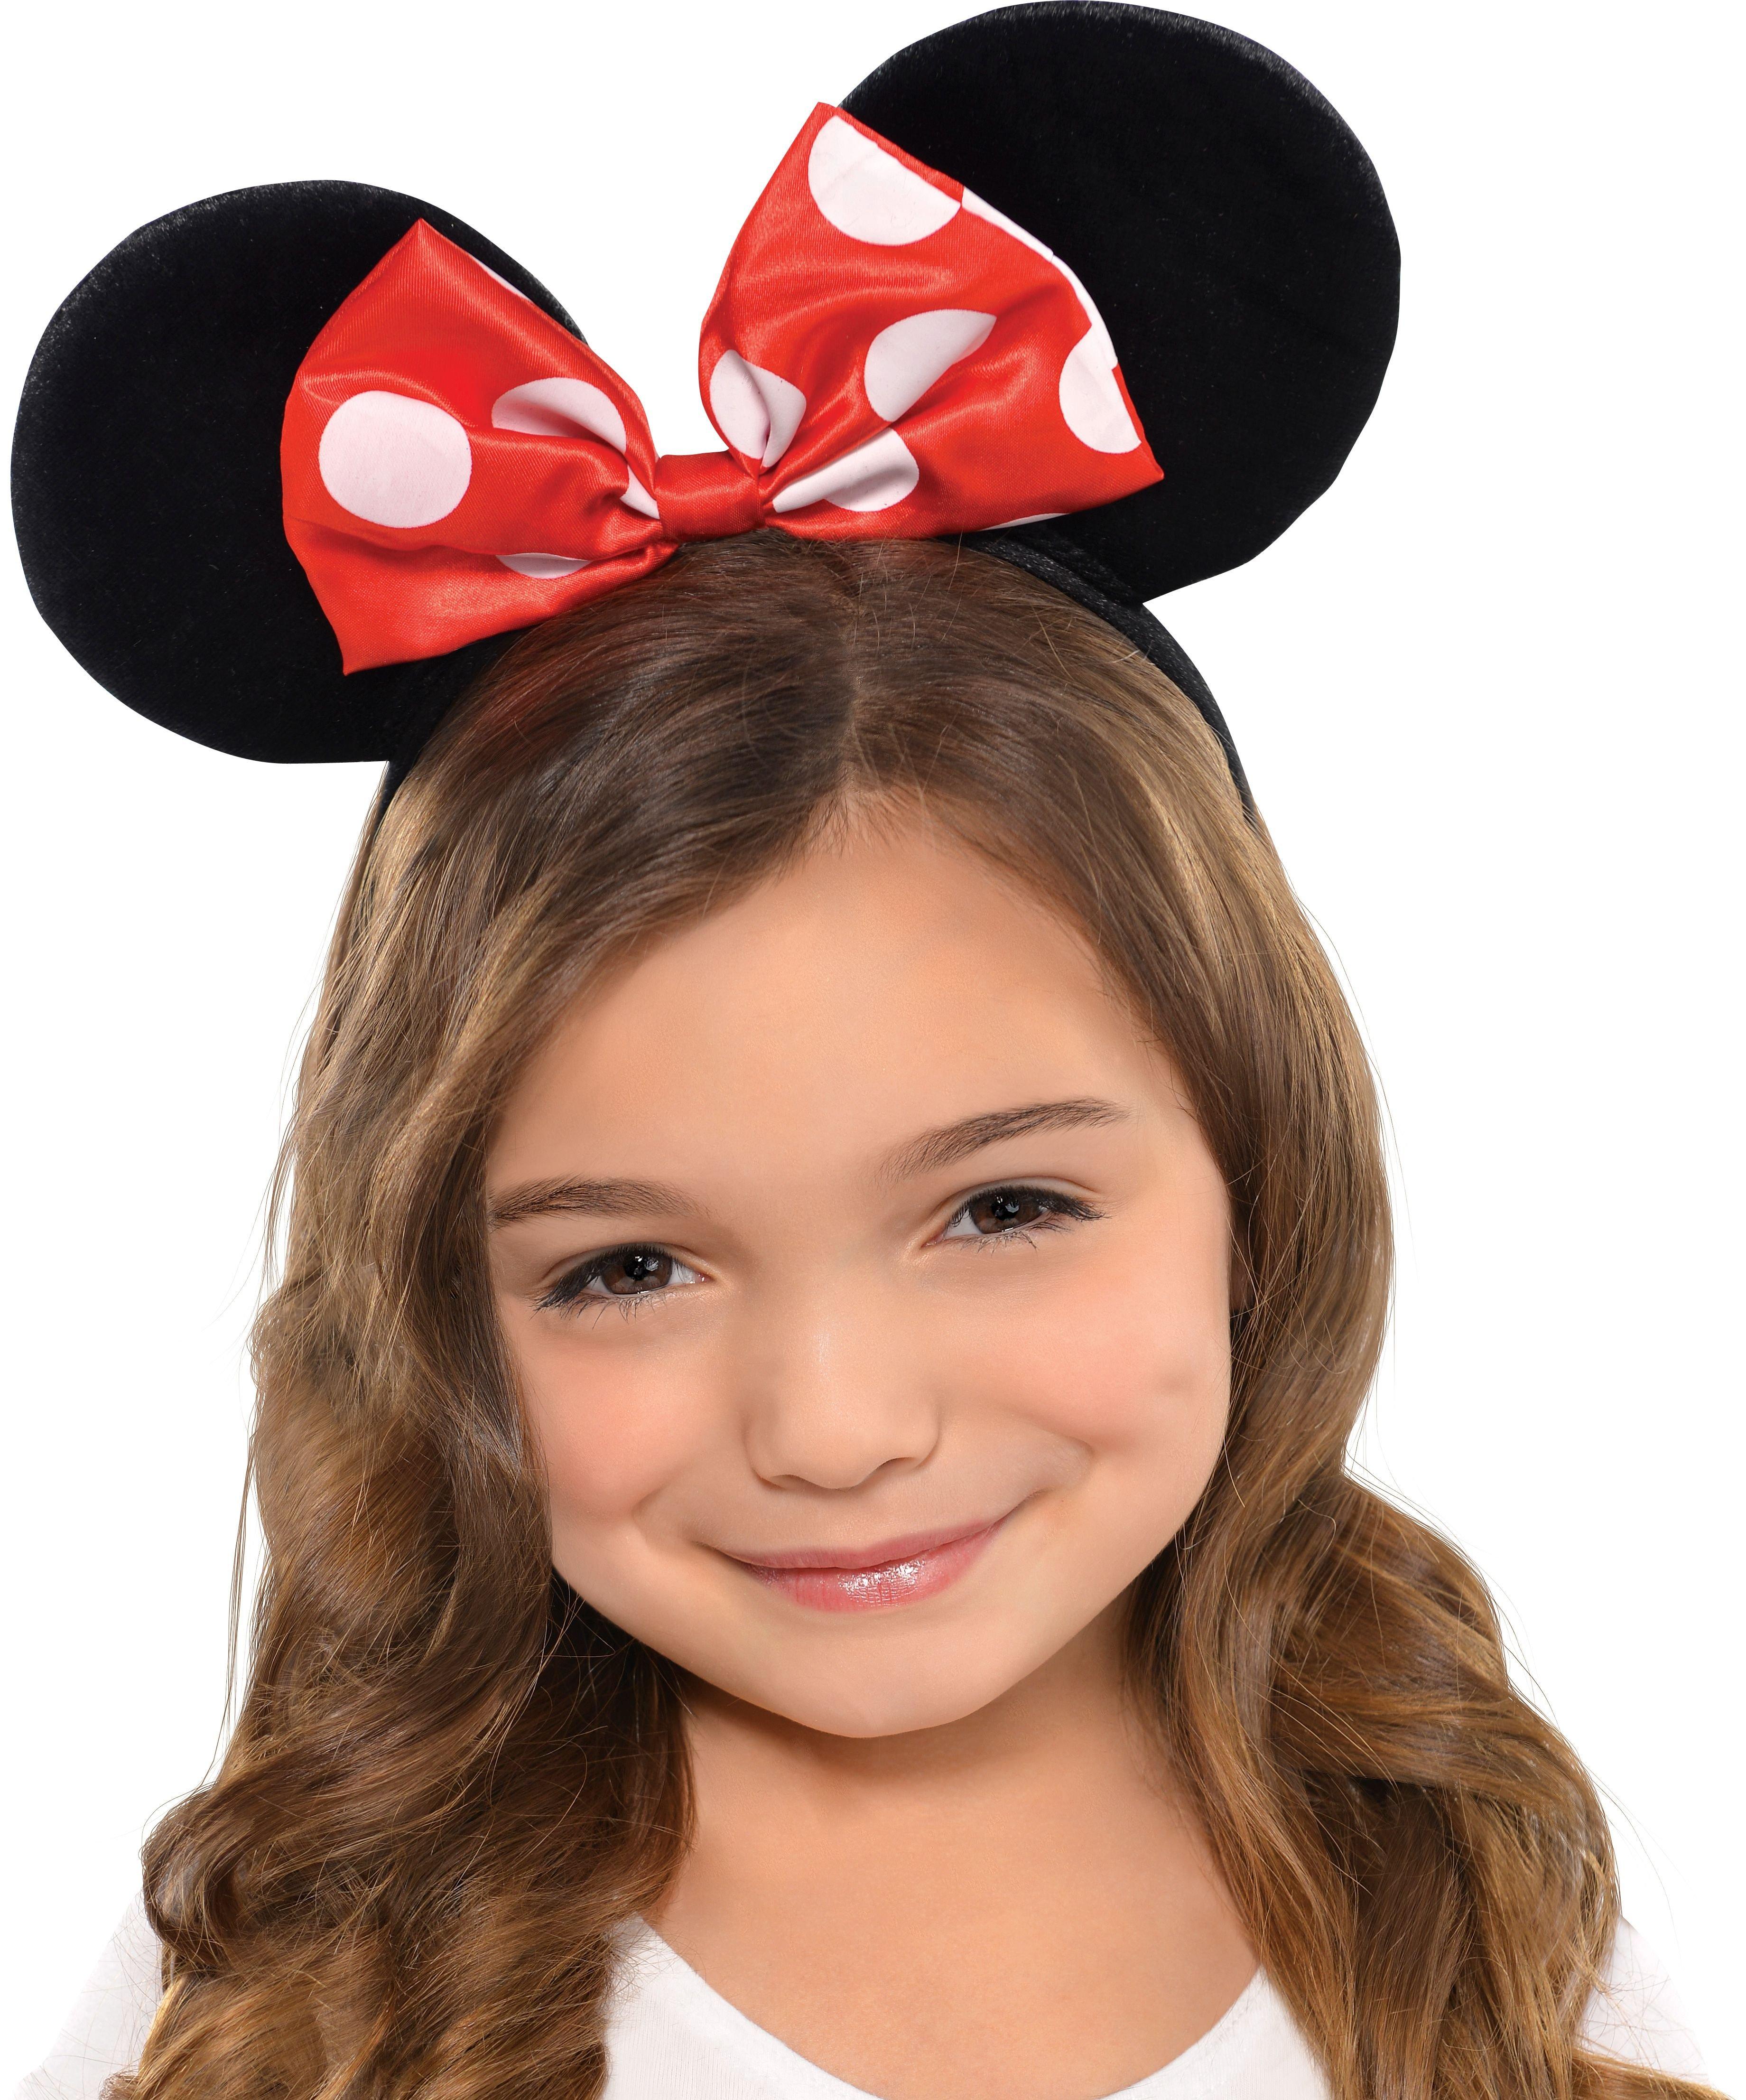 Minnie Mouse Ears for Kids